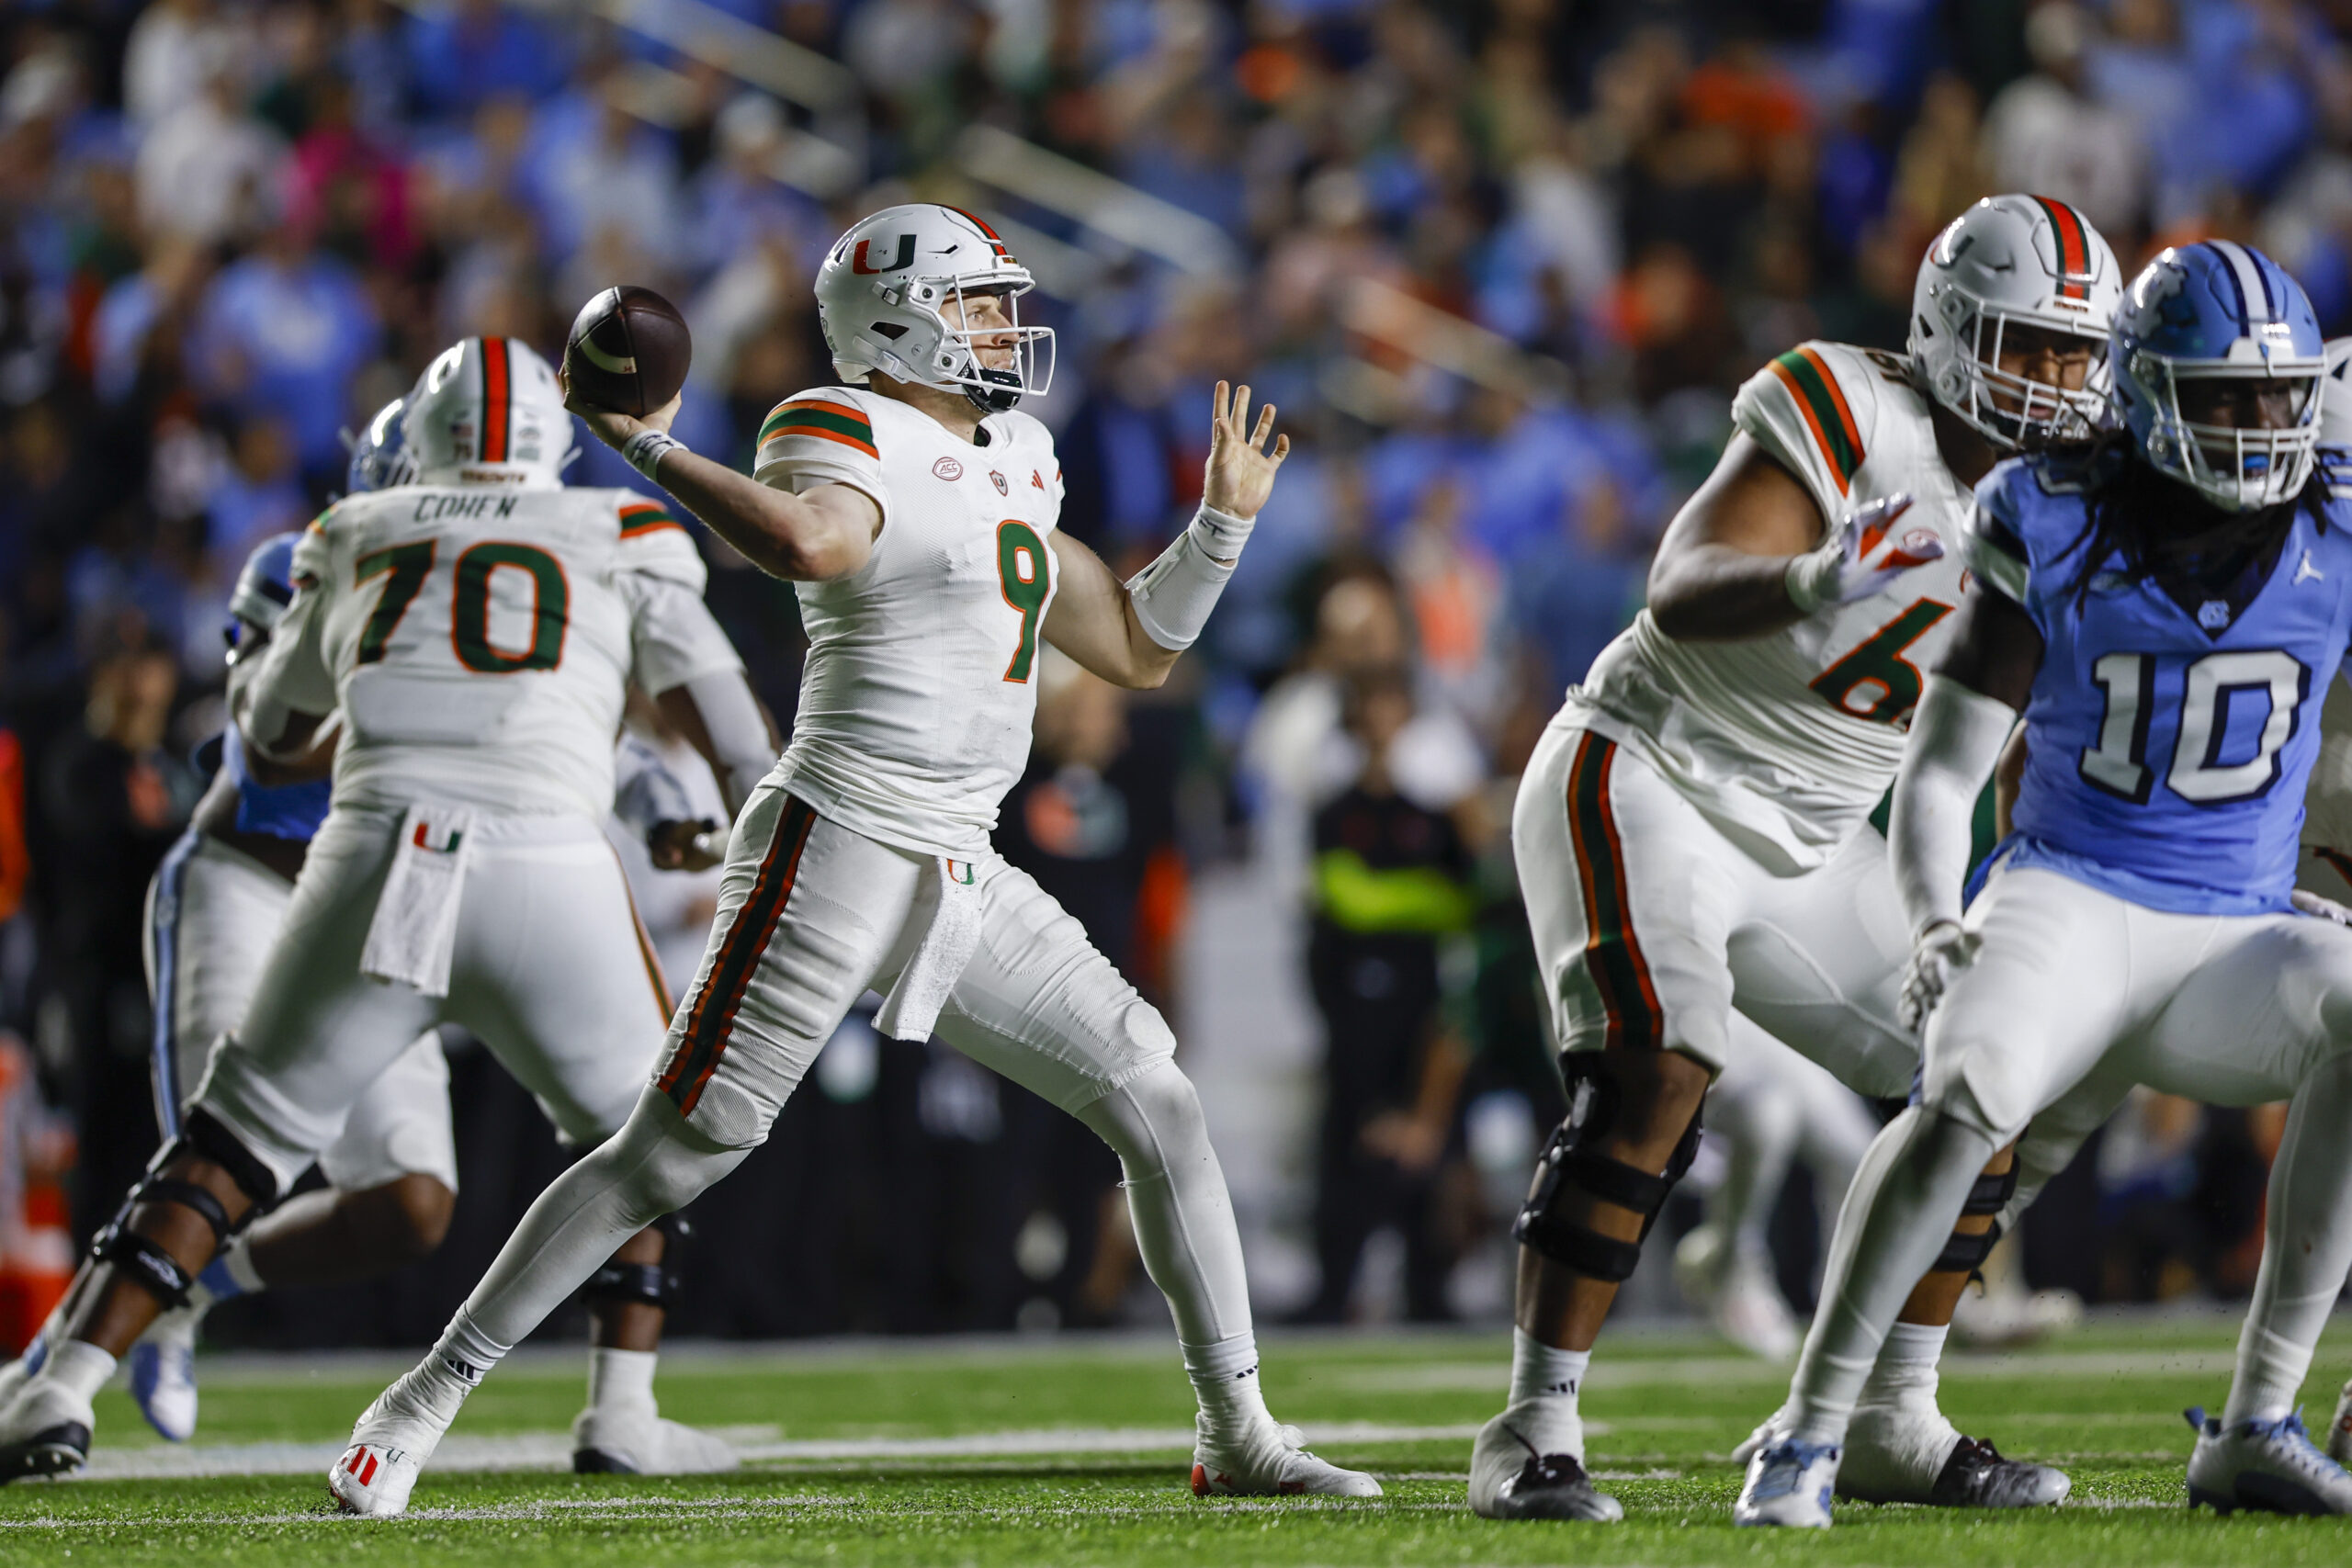 Miami quarterback Tyler Van Dyke dealing with a leg injury ahead of matchup against Clemson